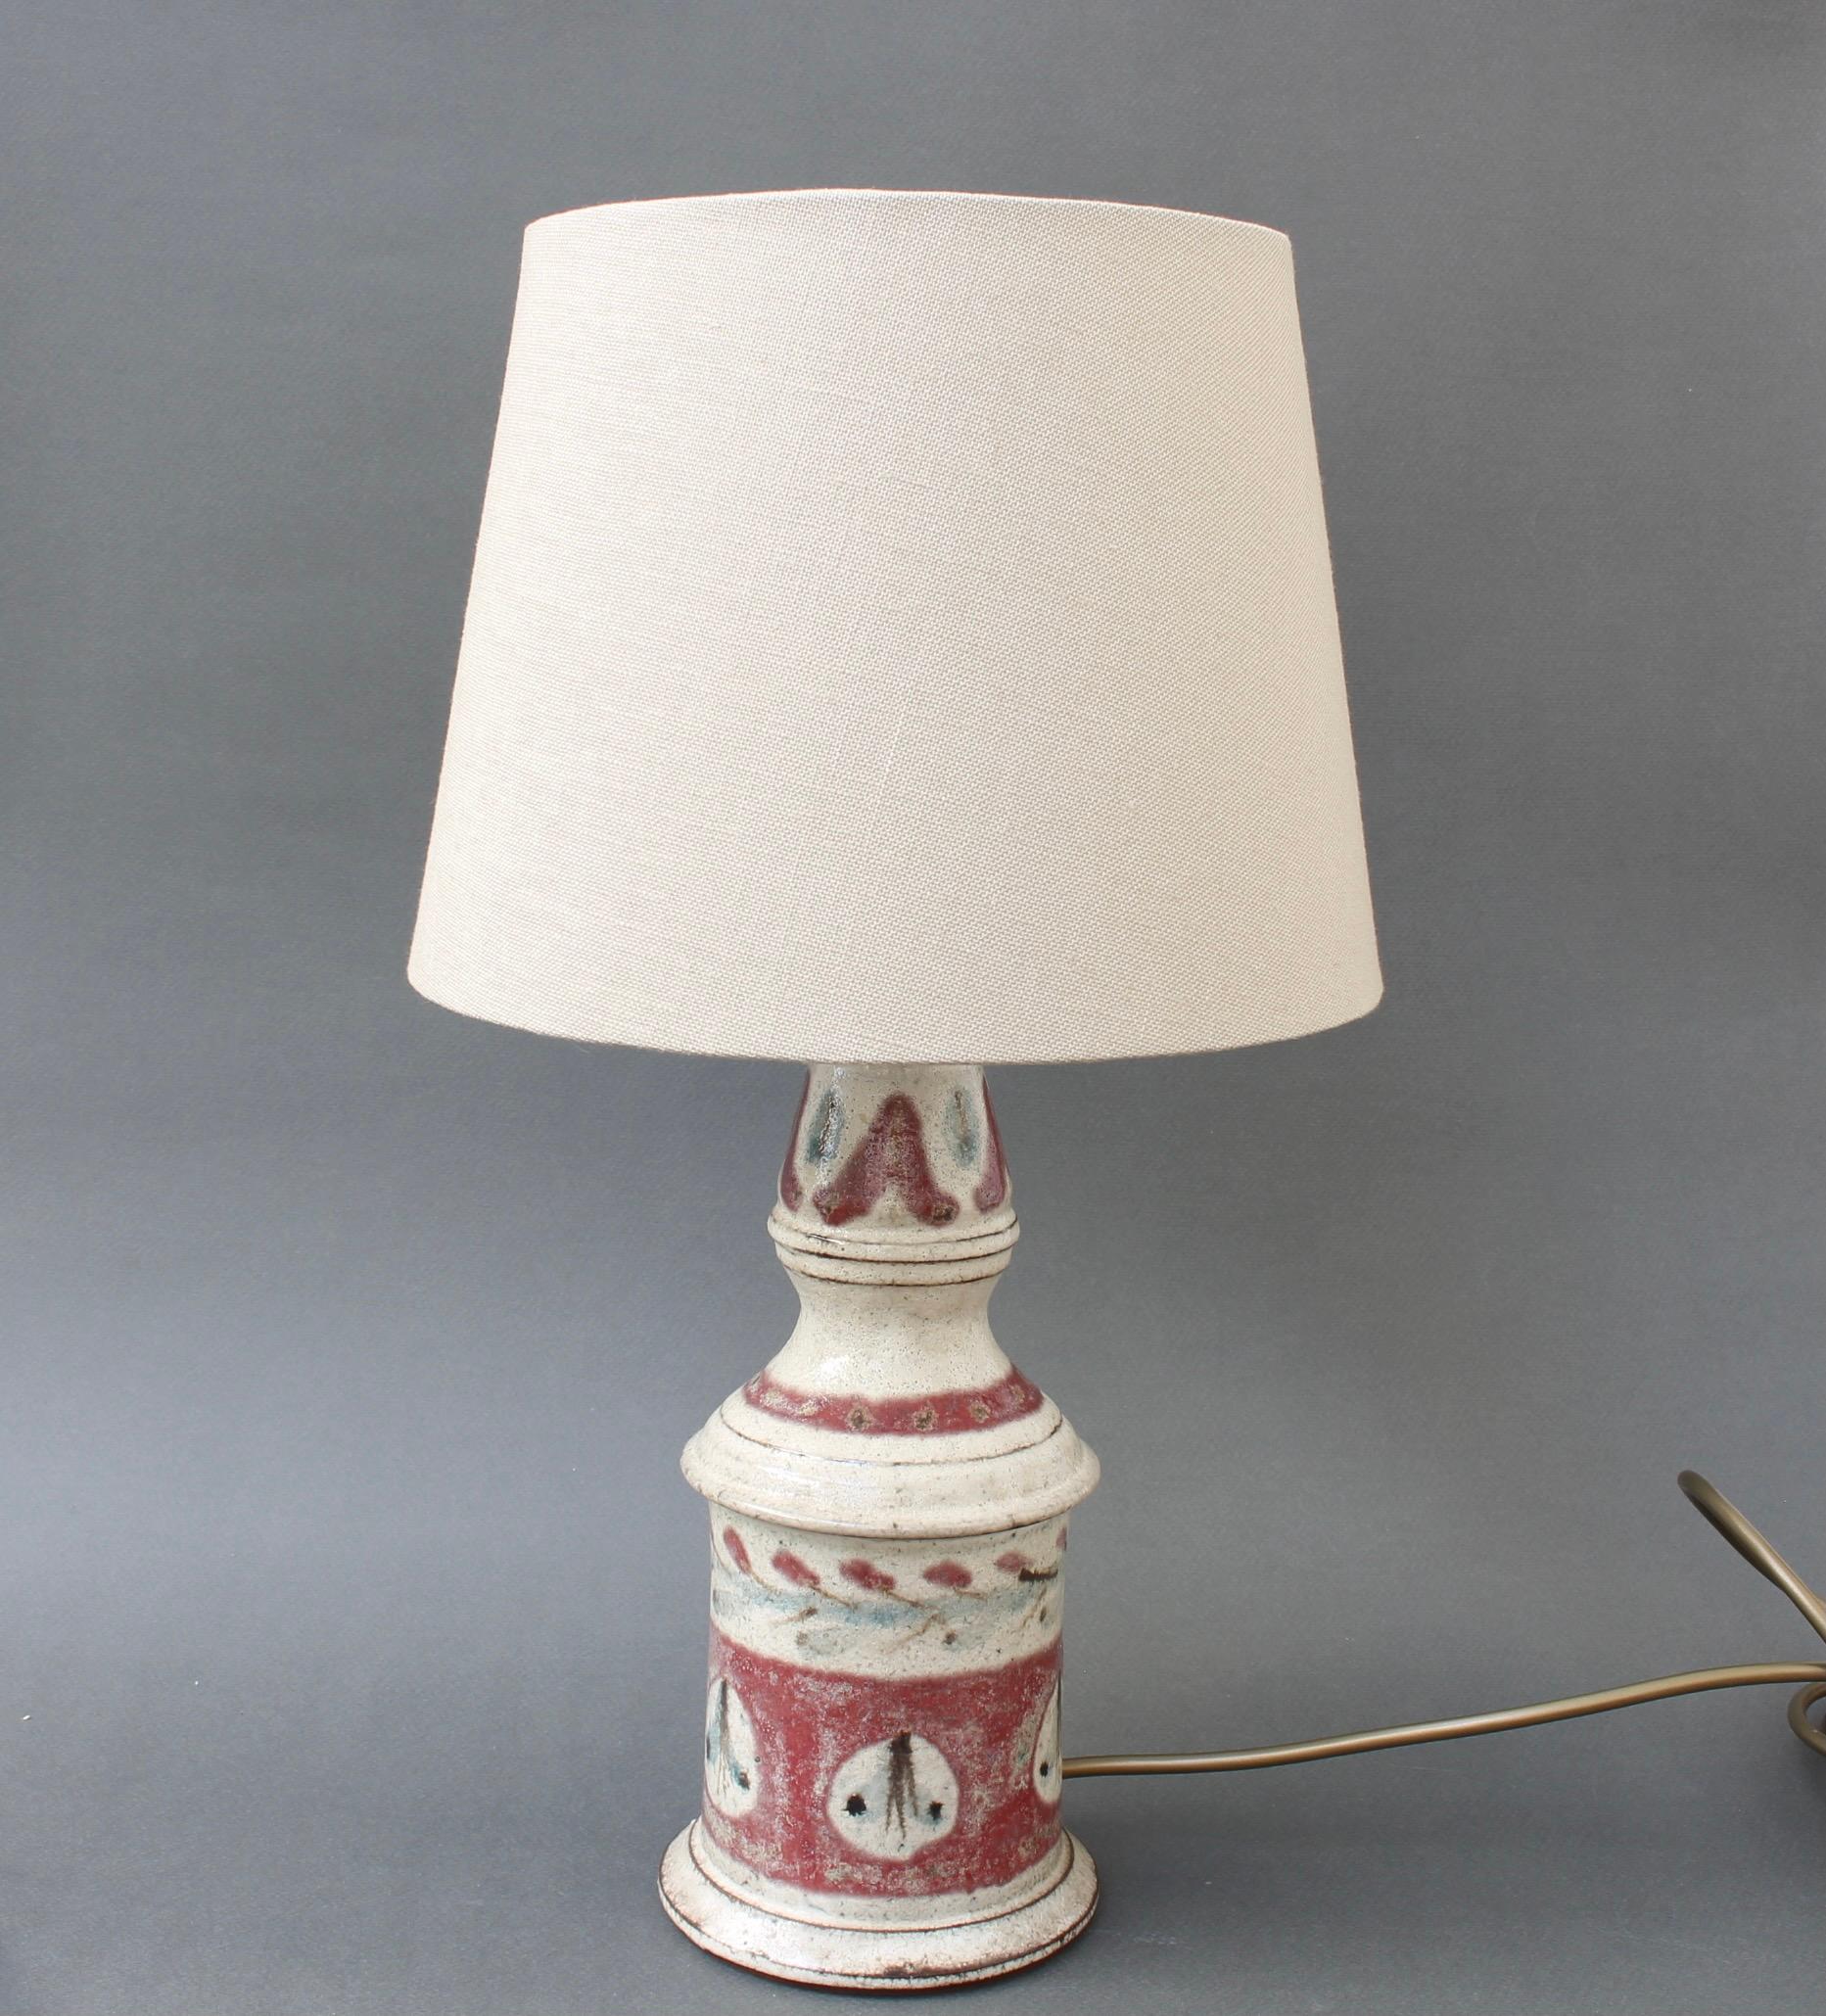 Vintage ceramic table lamp (circa 1960s) by Gustave Reynaud for Le Mûrier. A classic Reynaud design and decoration scheme; the lamp's base colour is done in an oatmeal glaze with painted mulberry coloured bands with light blue accents in the plant